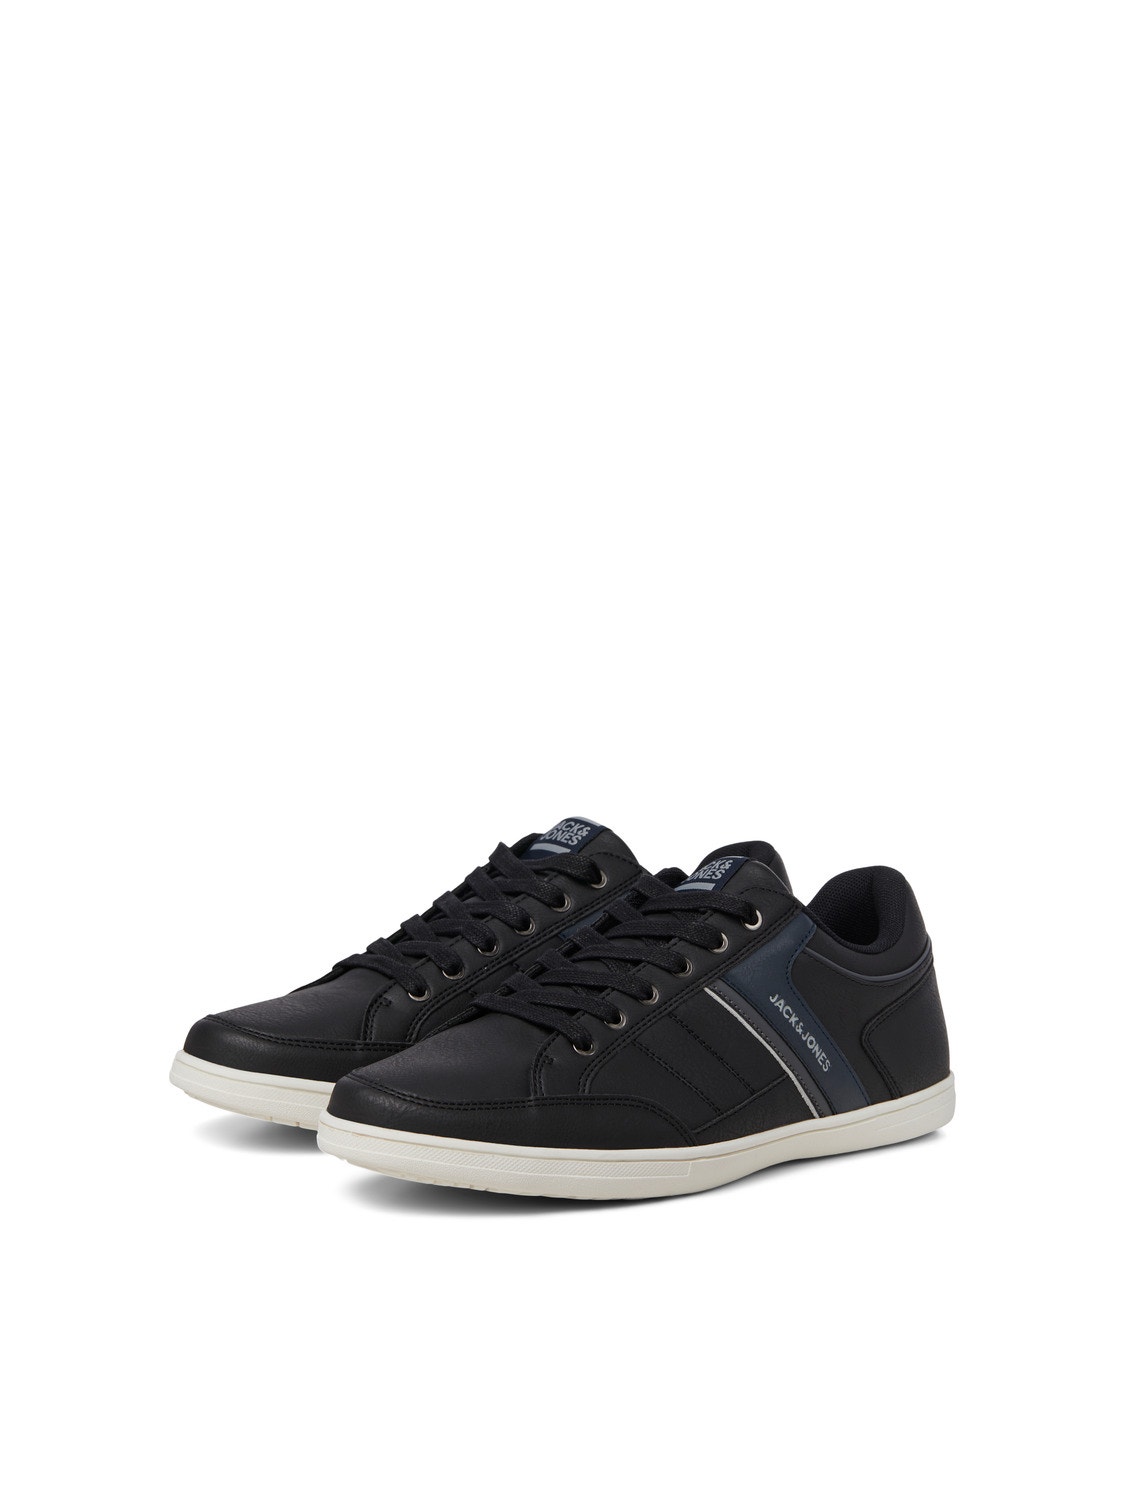 Jack & Jones Polyester Trainers -Anthracite - 12203489